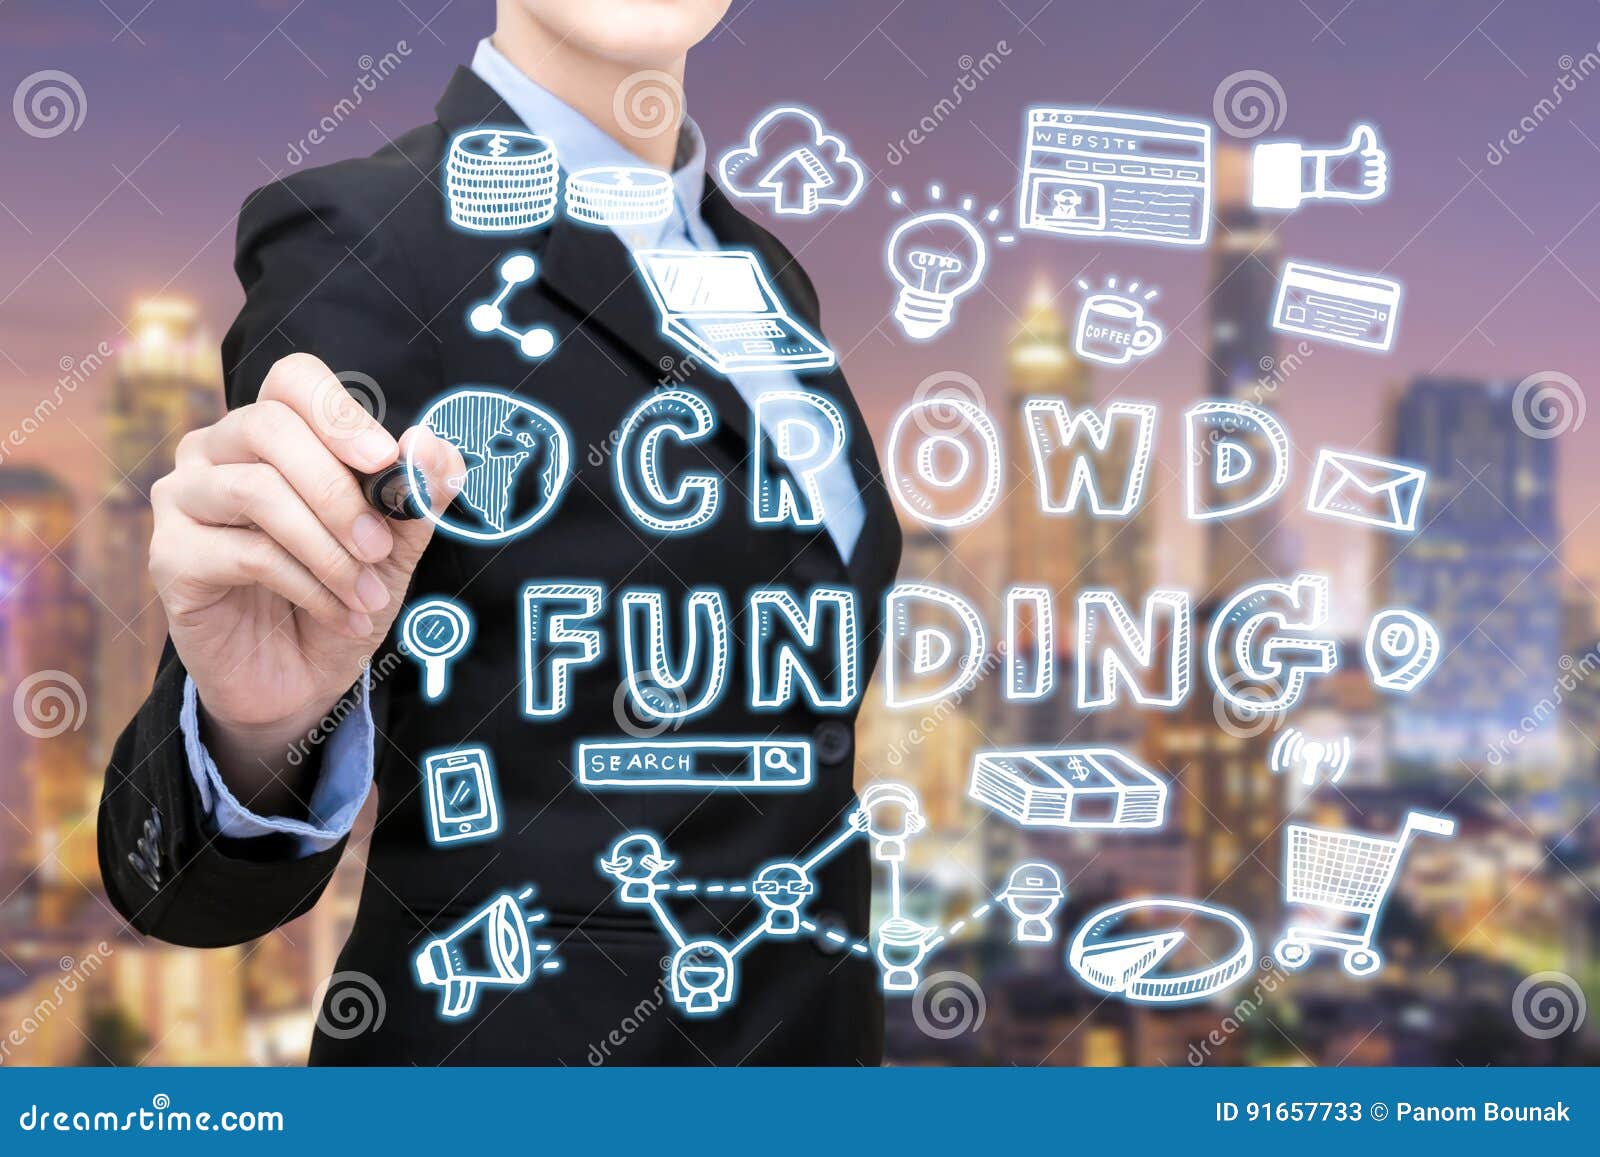 asian business woman is writing crowdfunding idea concept.